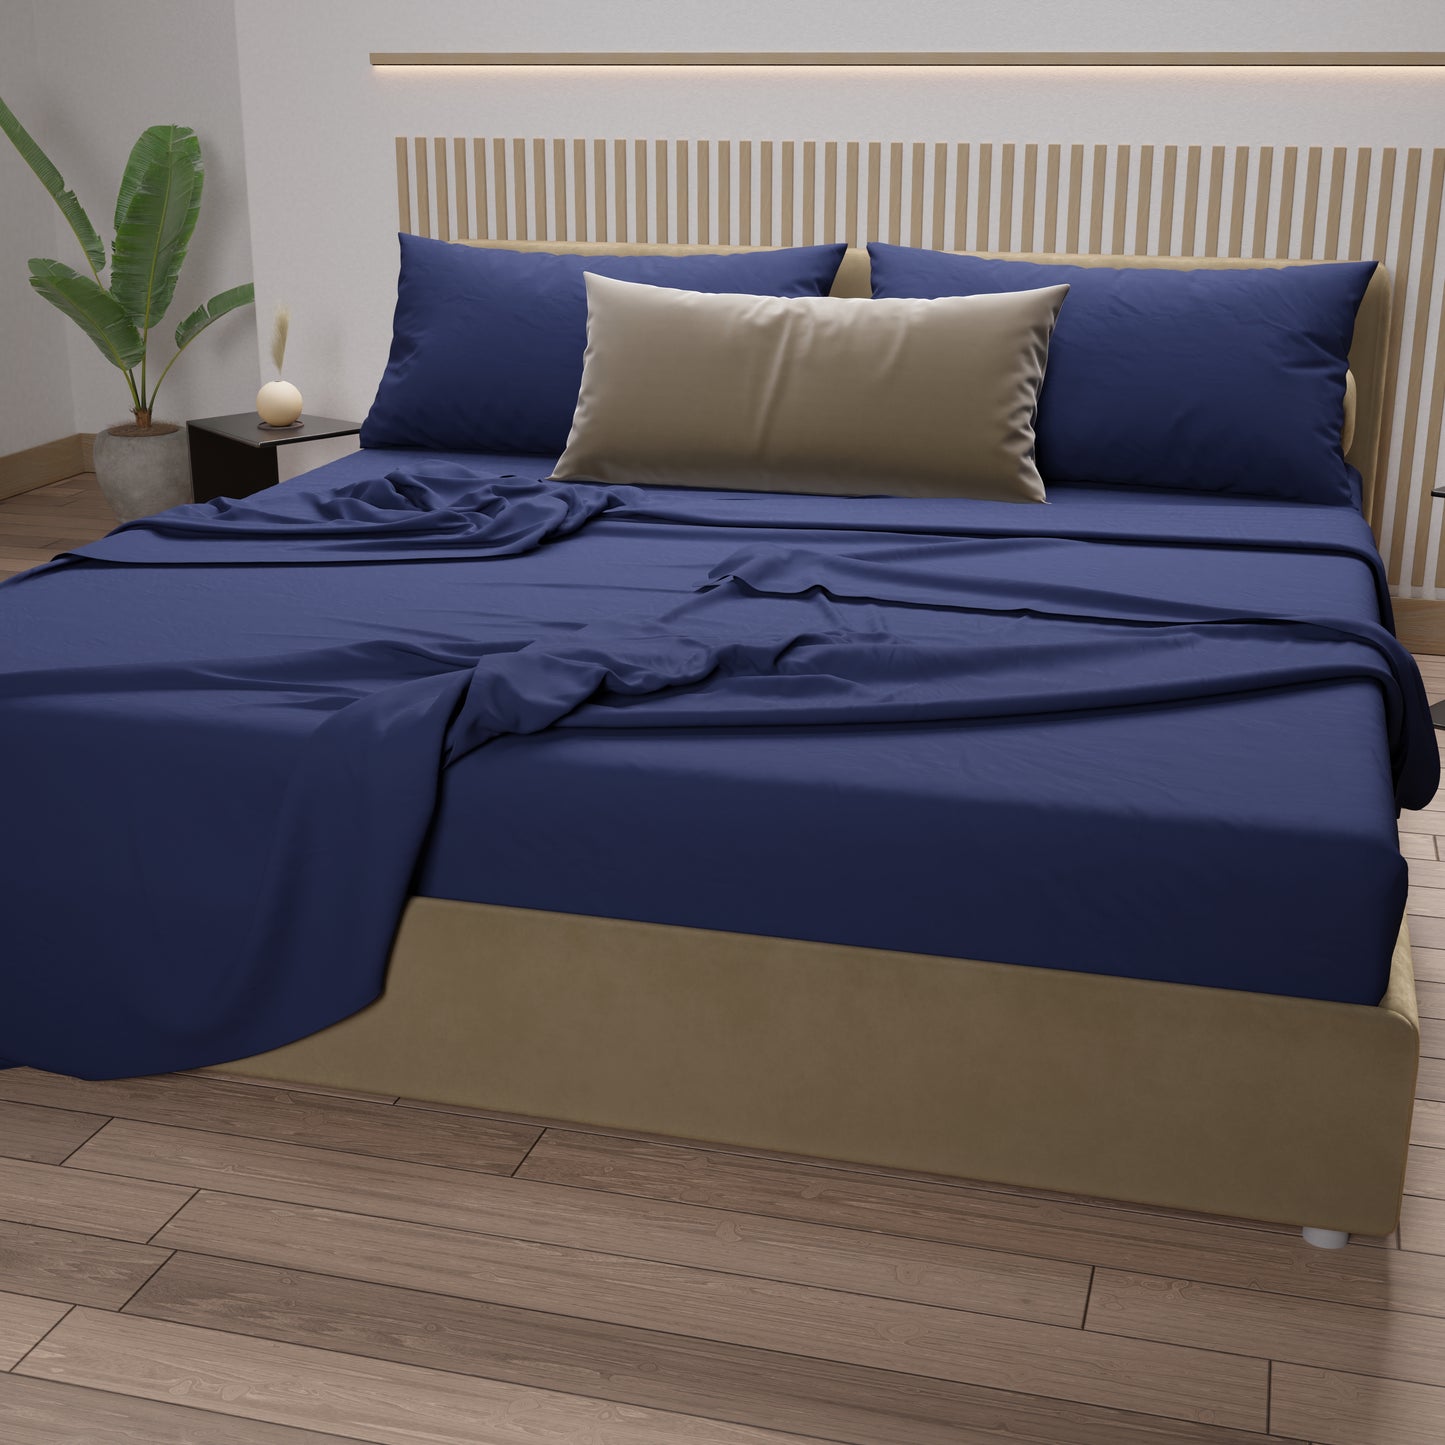 Double, Single, Single and Half Sheets, 100% Cotton, Electric Blue